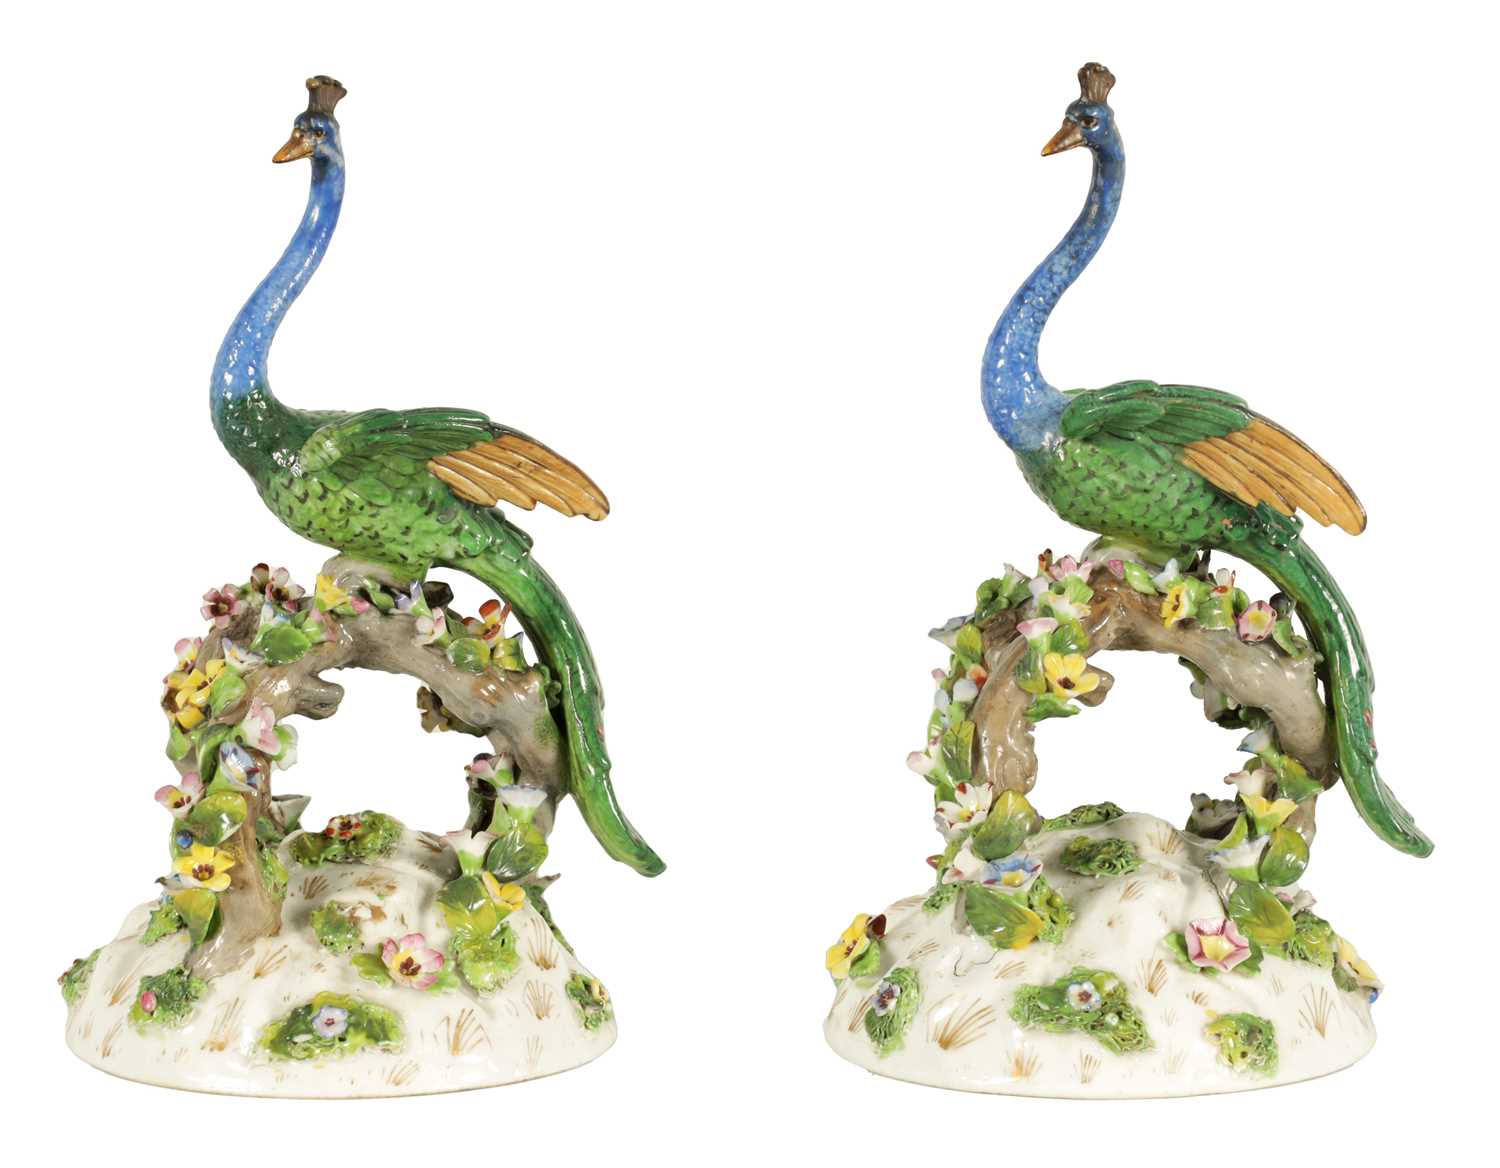 Lot 79 - A PAIR OF 19TH CENTURY DRESDEN PORCELAIN PEACOCK FIGURES